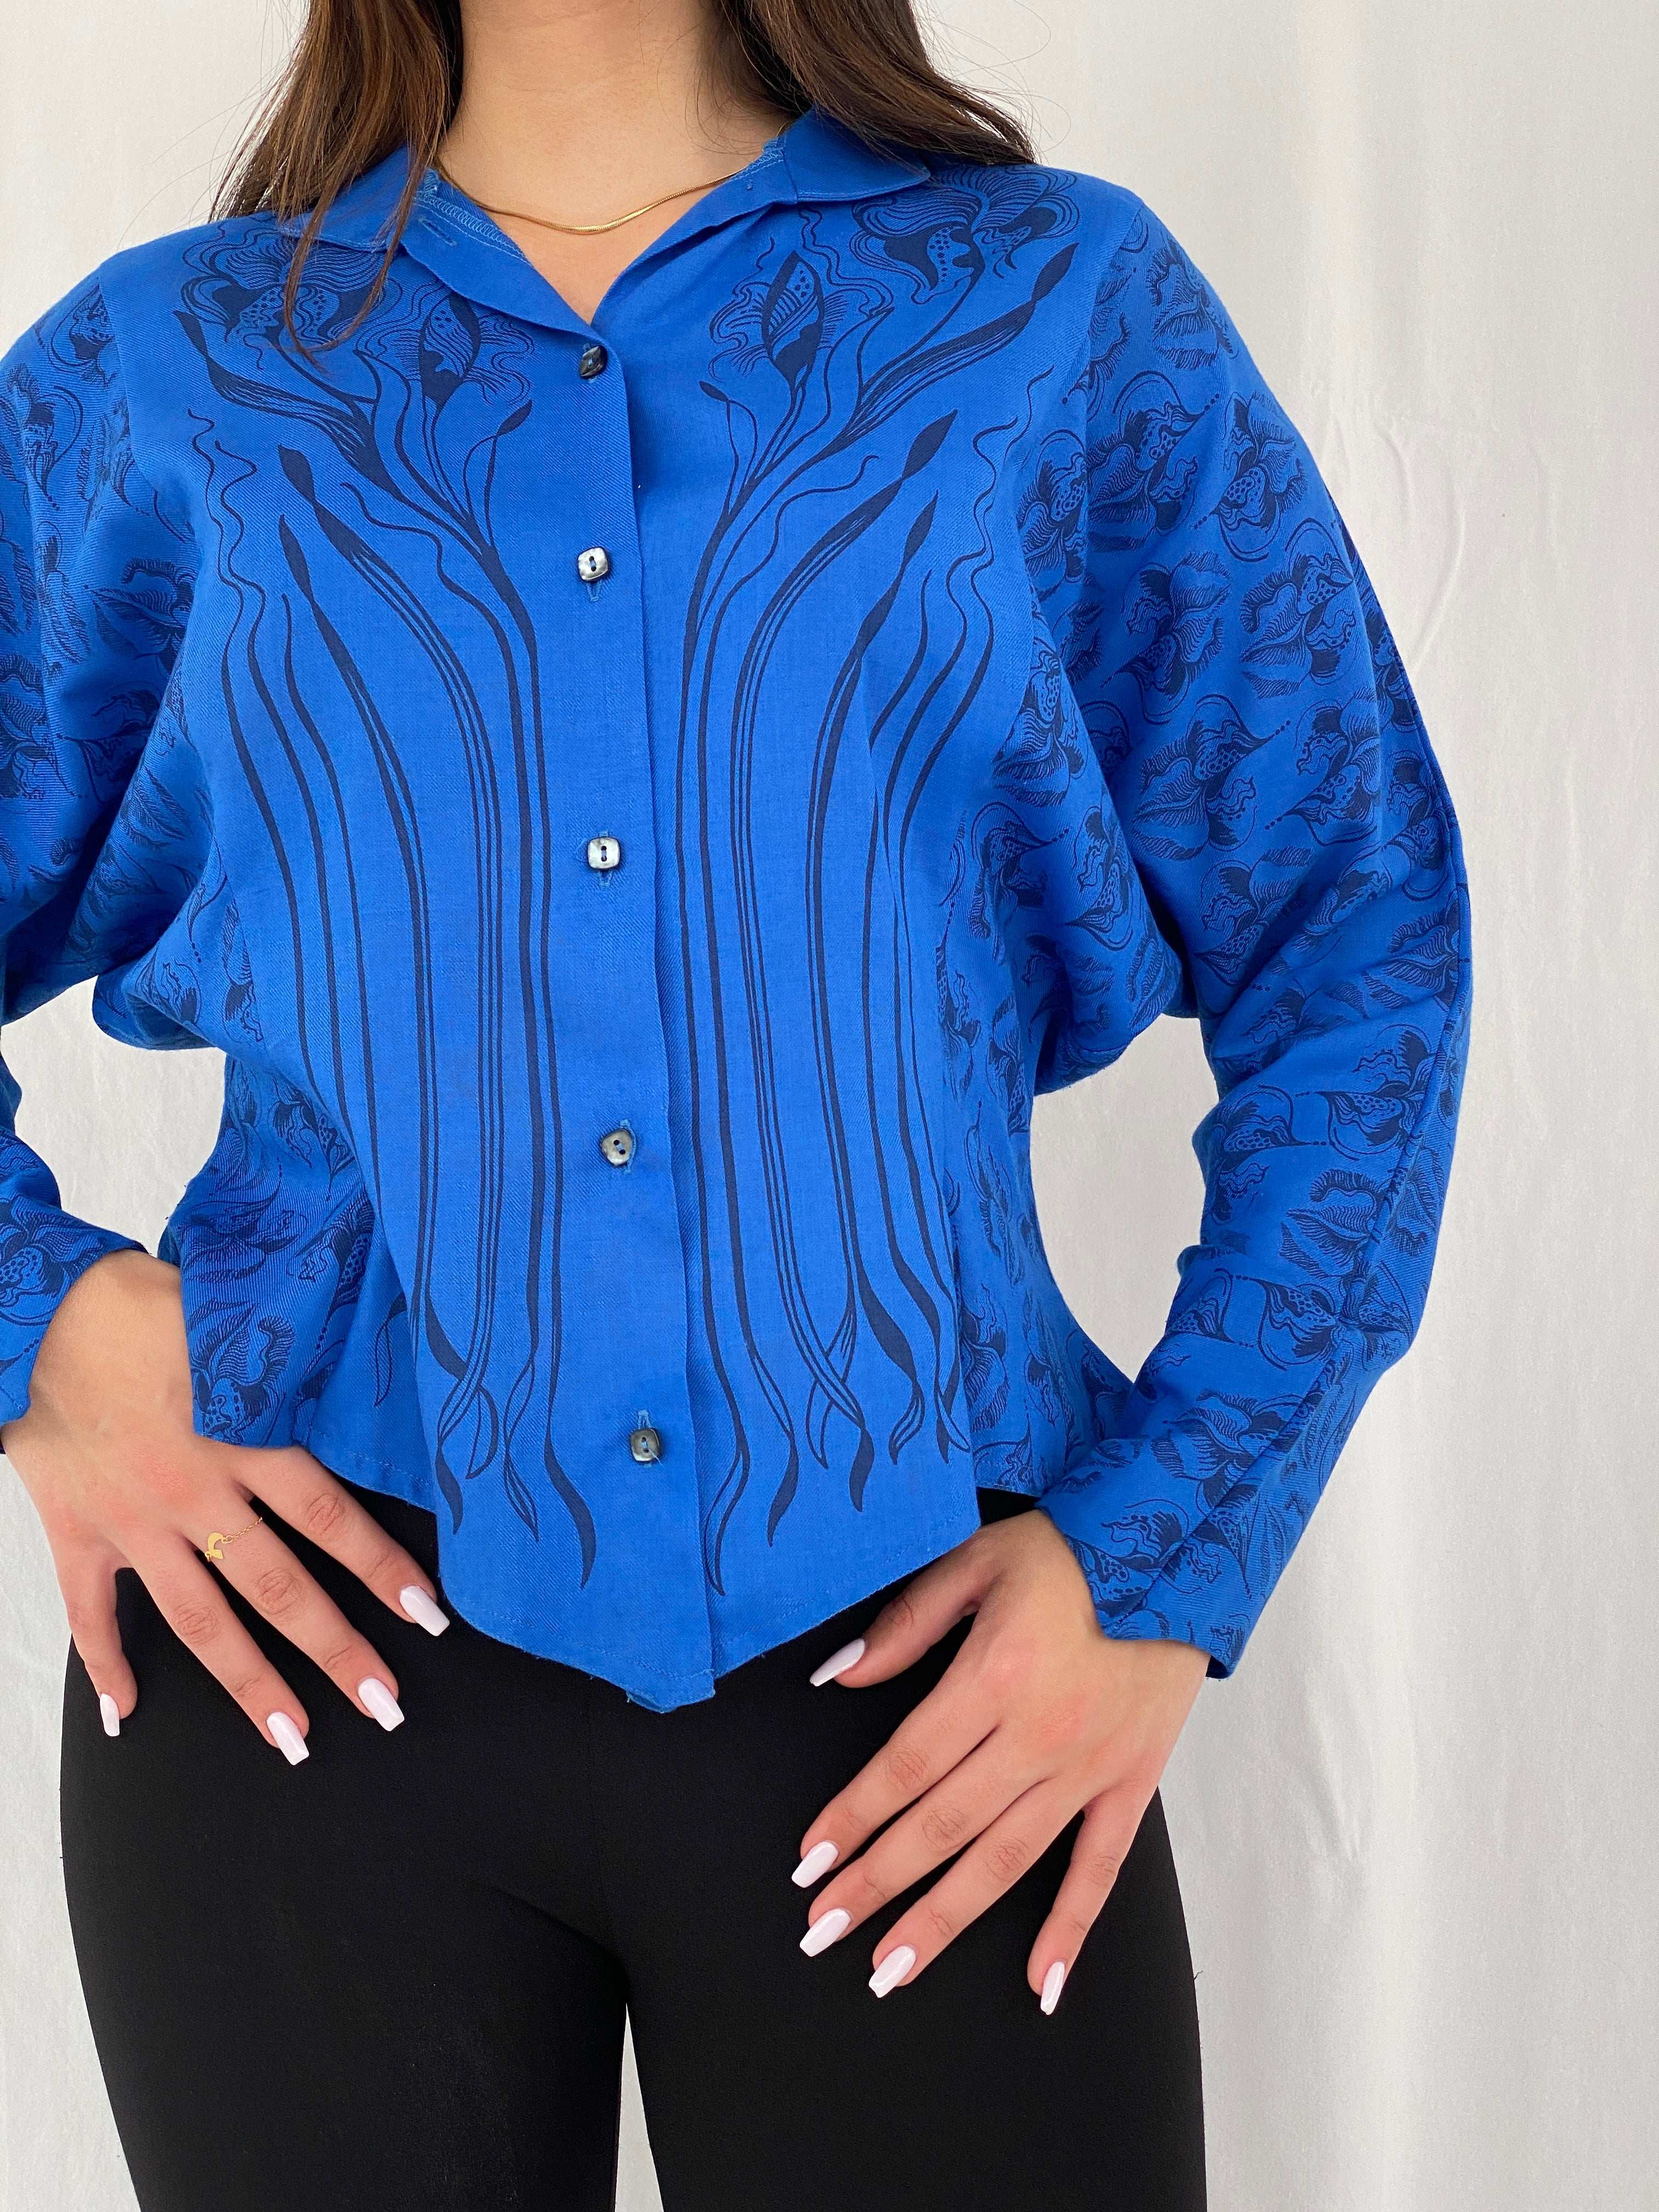 Vintage 90s Lorna Wiles Western Style Blue Shirt Size L